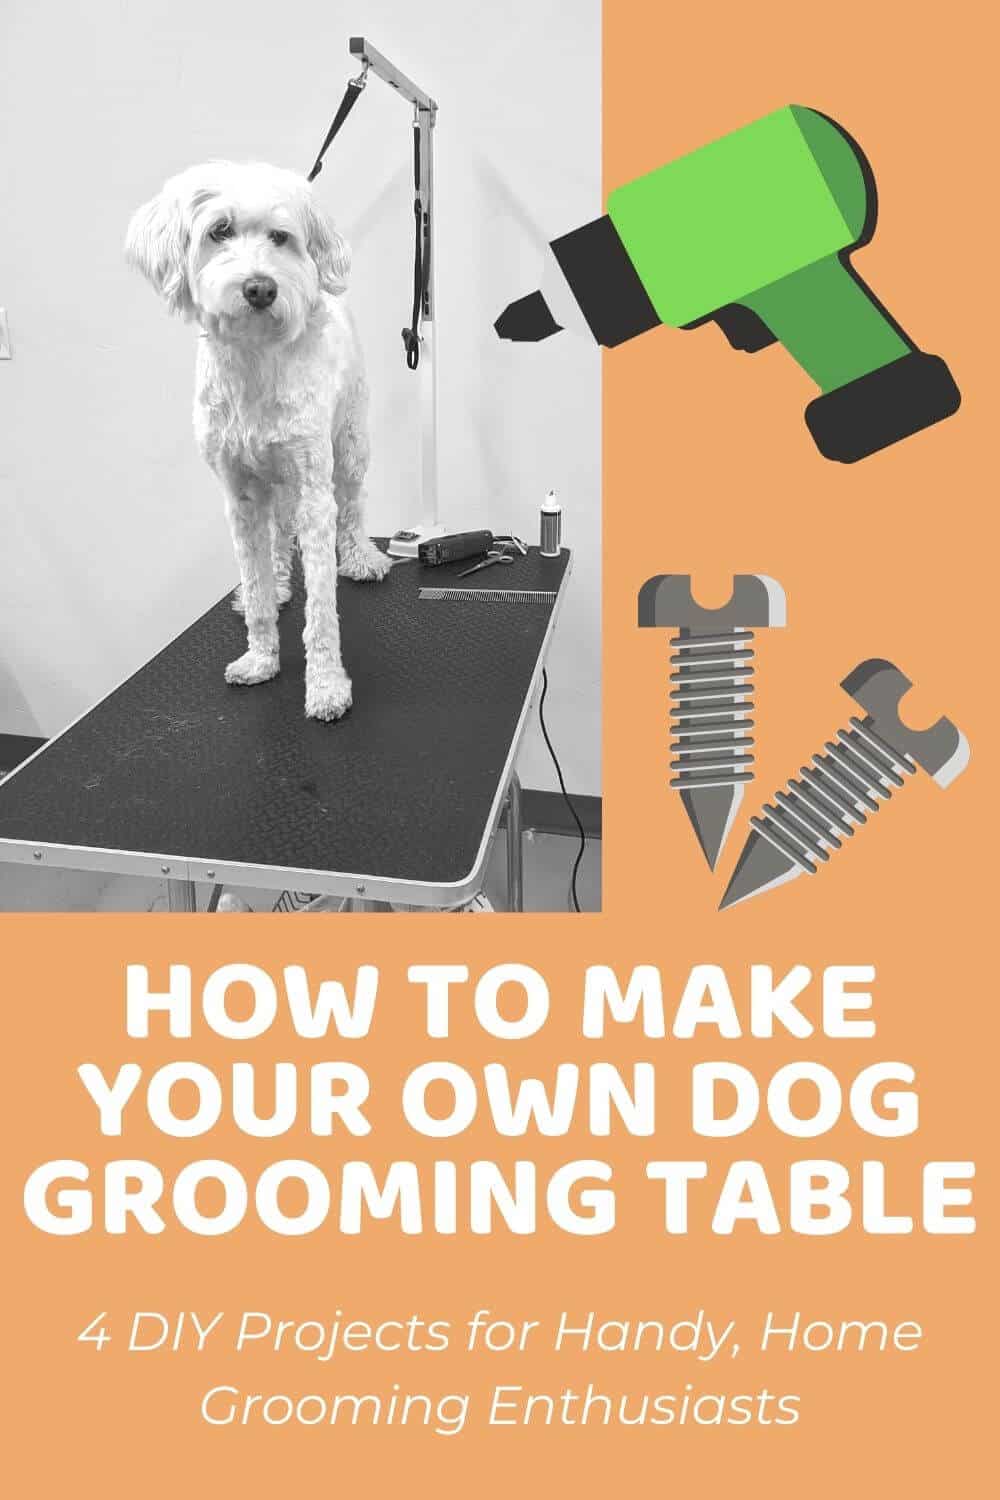 4 DIY Dog Grooming Table Projects for Handy People